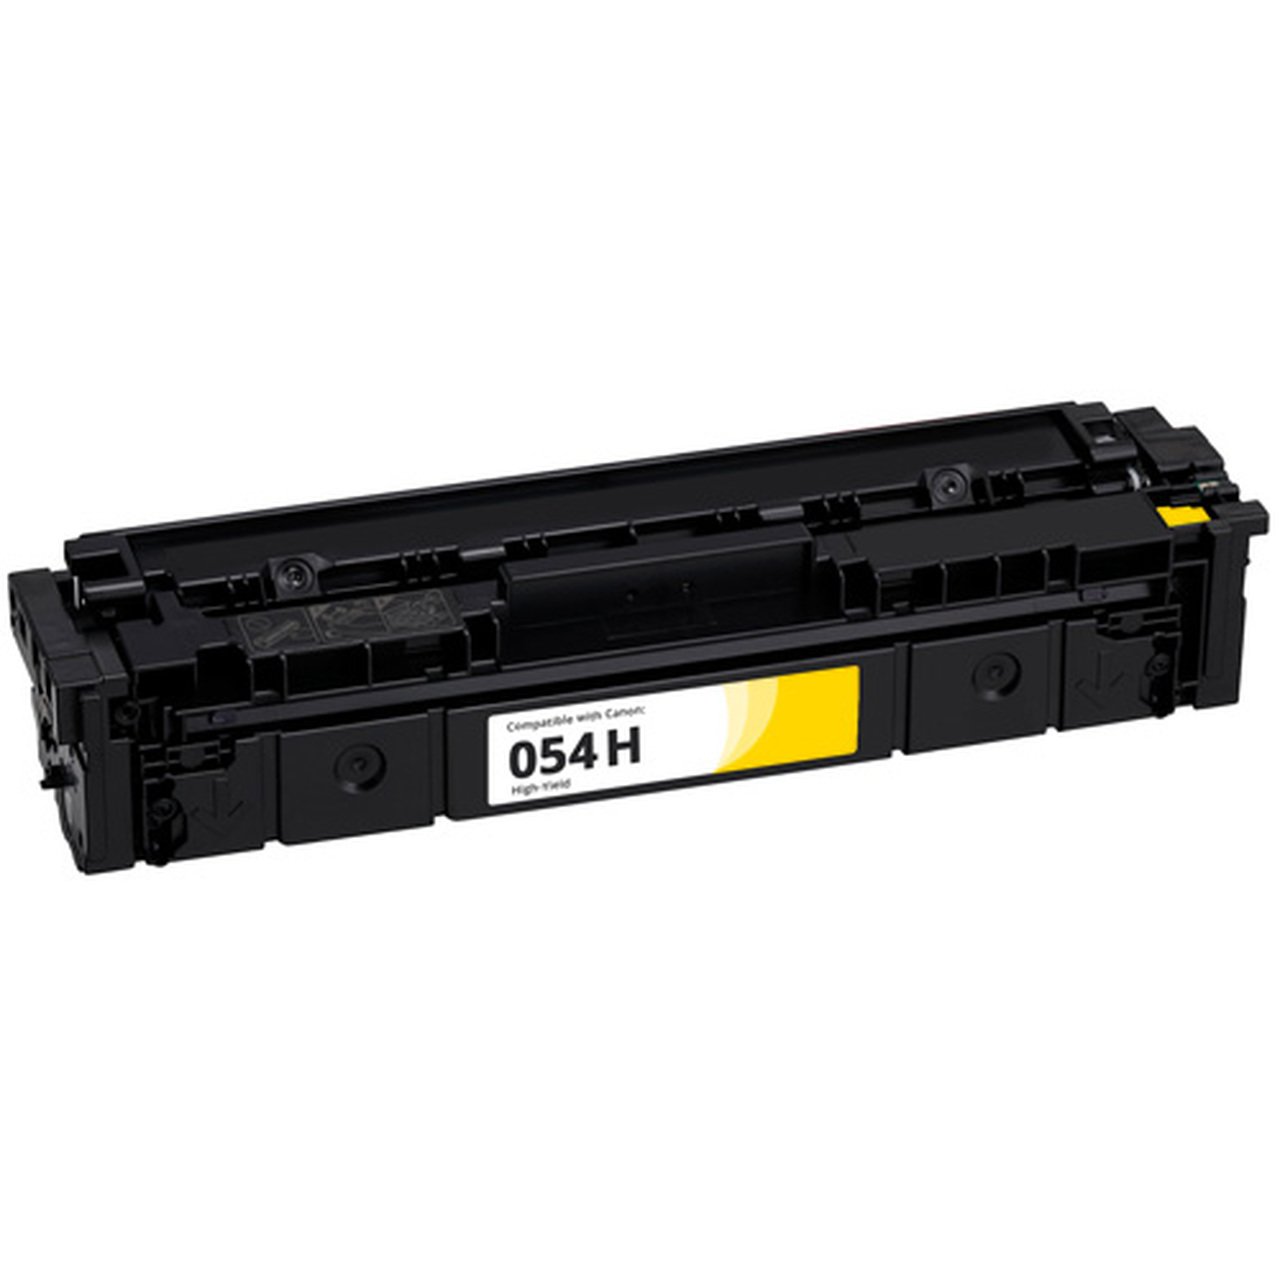 Absolute Toner Compatible Canon 054H 3025C001 Yellow Toner Cartridge | Absolute Toner Canon Toner Cartridges